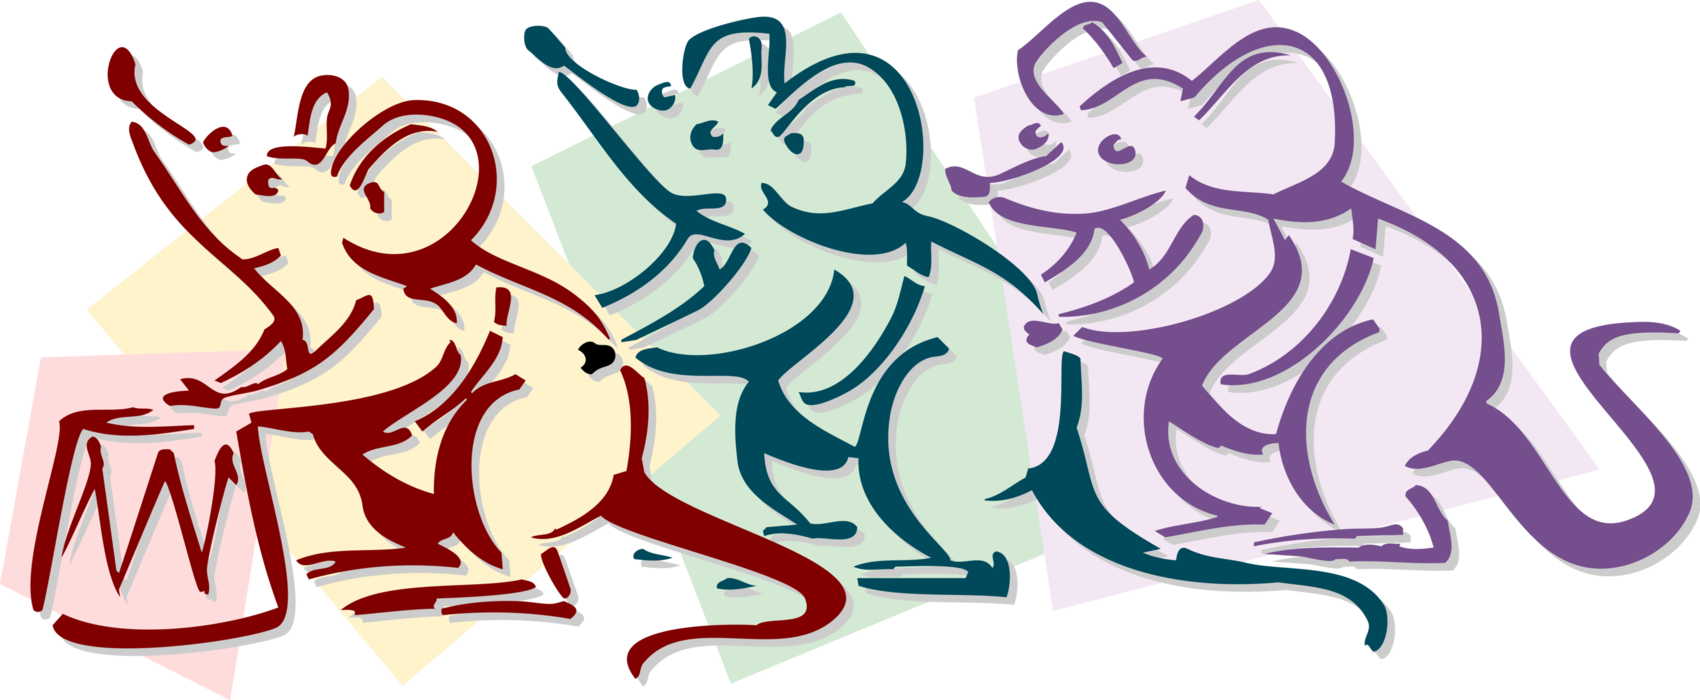 Vector Illustration of Big Top Circus Rodent Mice Performing